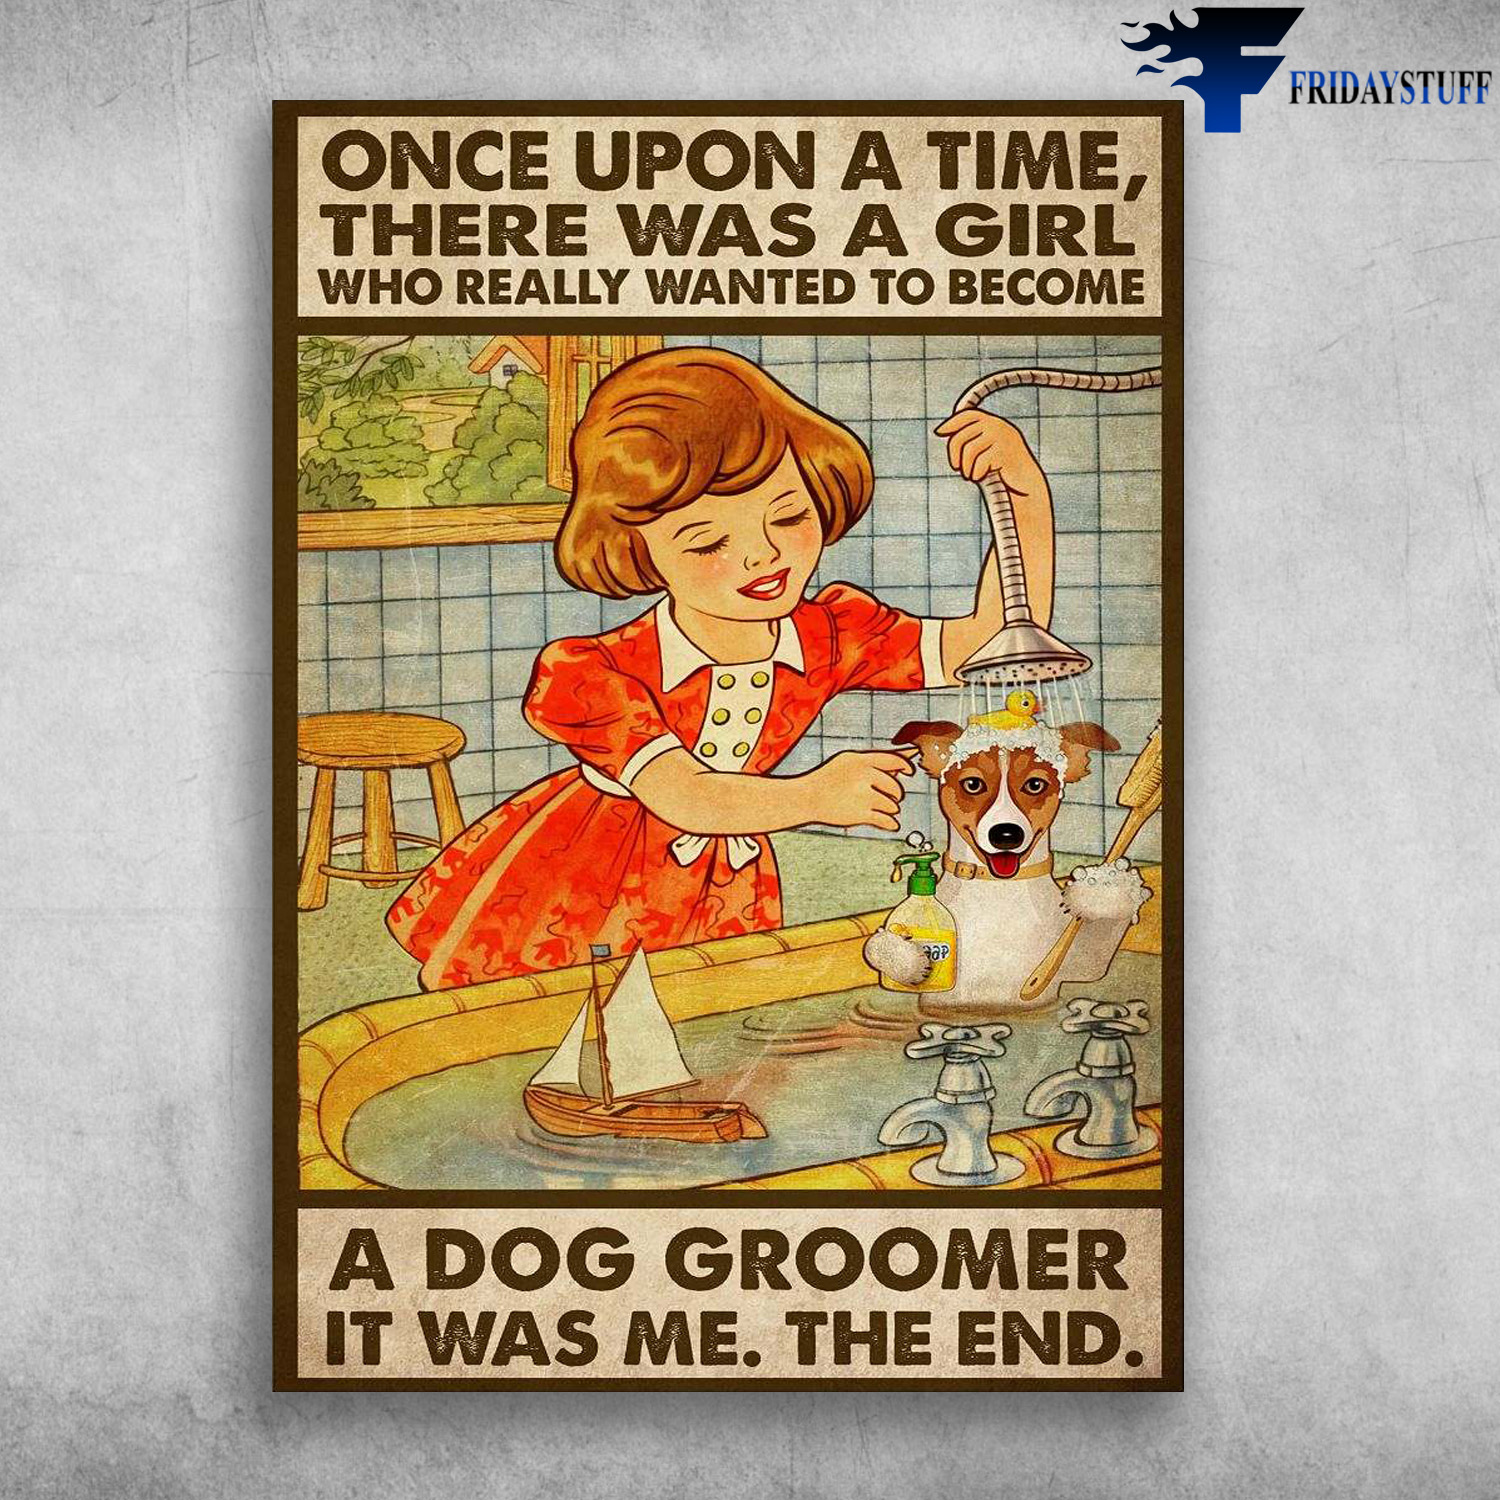 Dog Groomer Girl - Once Upon A Time, There Was A Girl, Who Really Wanted To Become, A Dog Groomer, It Was Me, The End